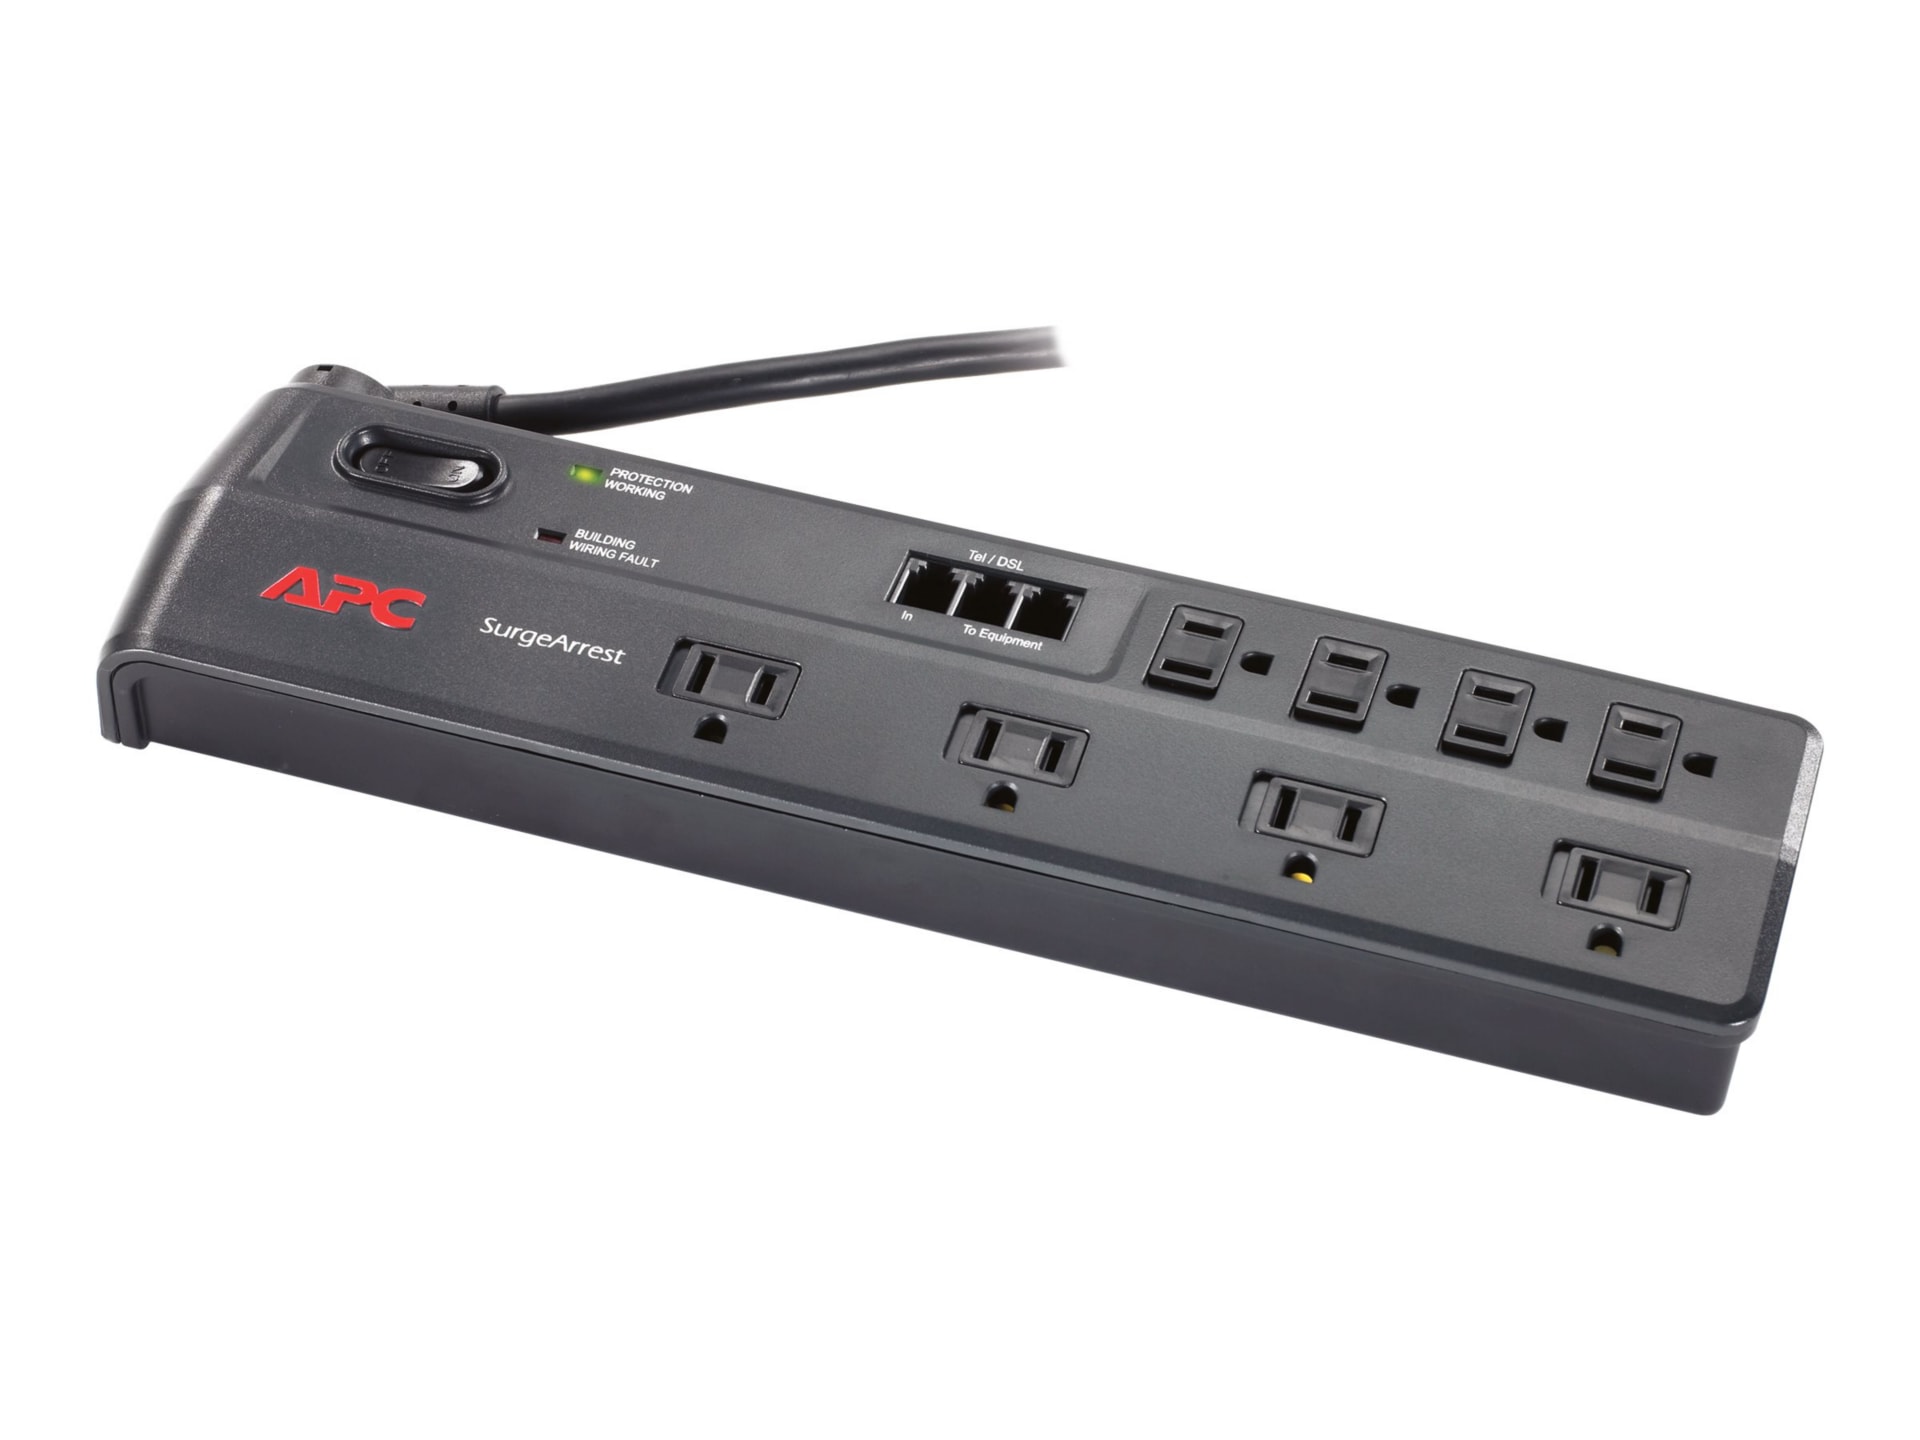 APC 8-Outlet Telephone Surge Protector, 6ft Cord 2770 Joules, Black